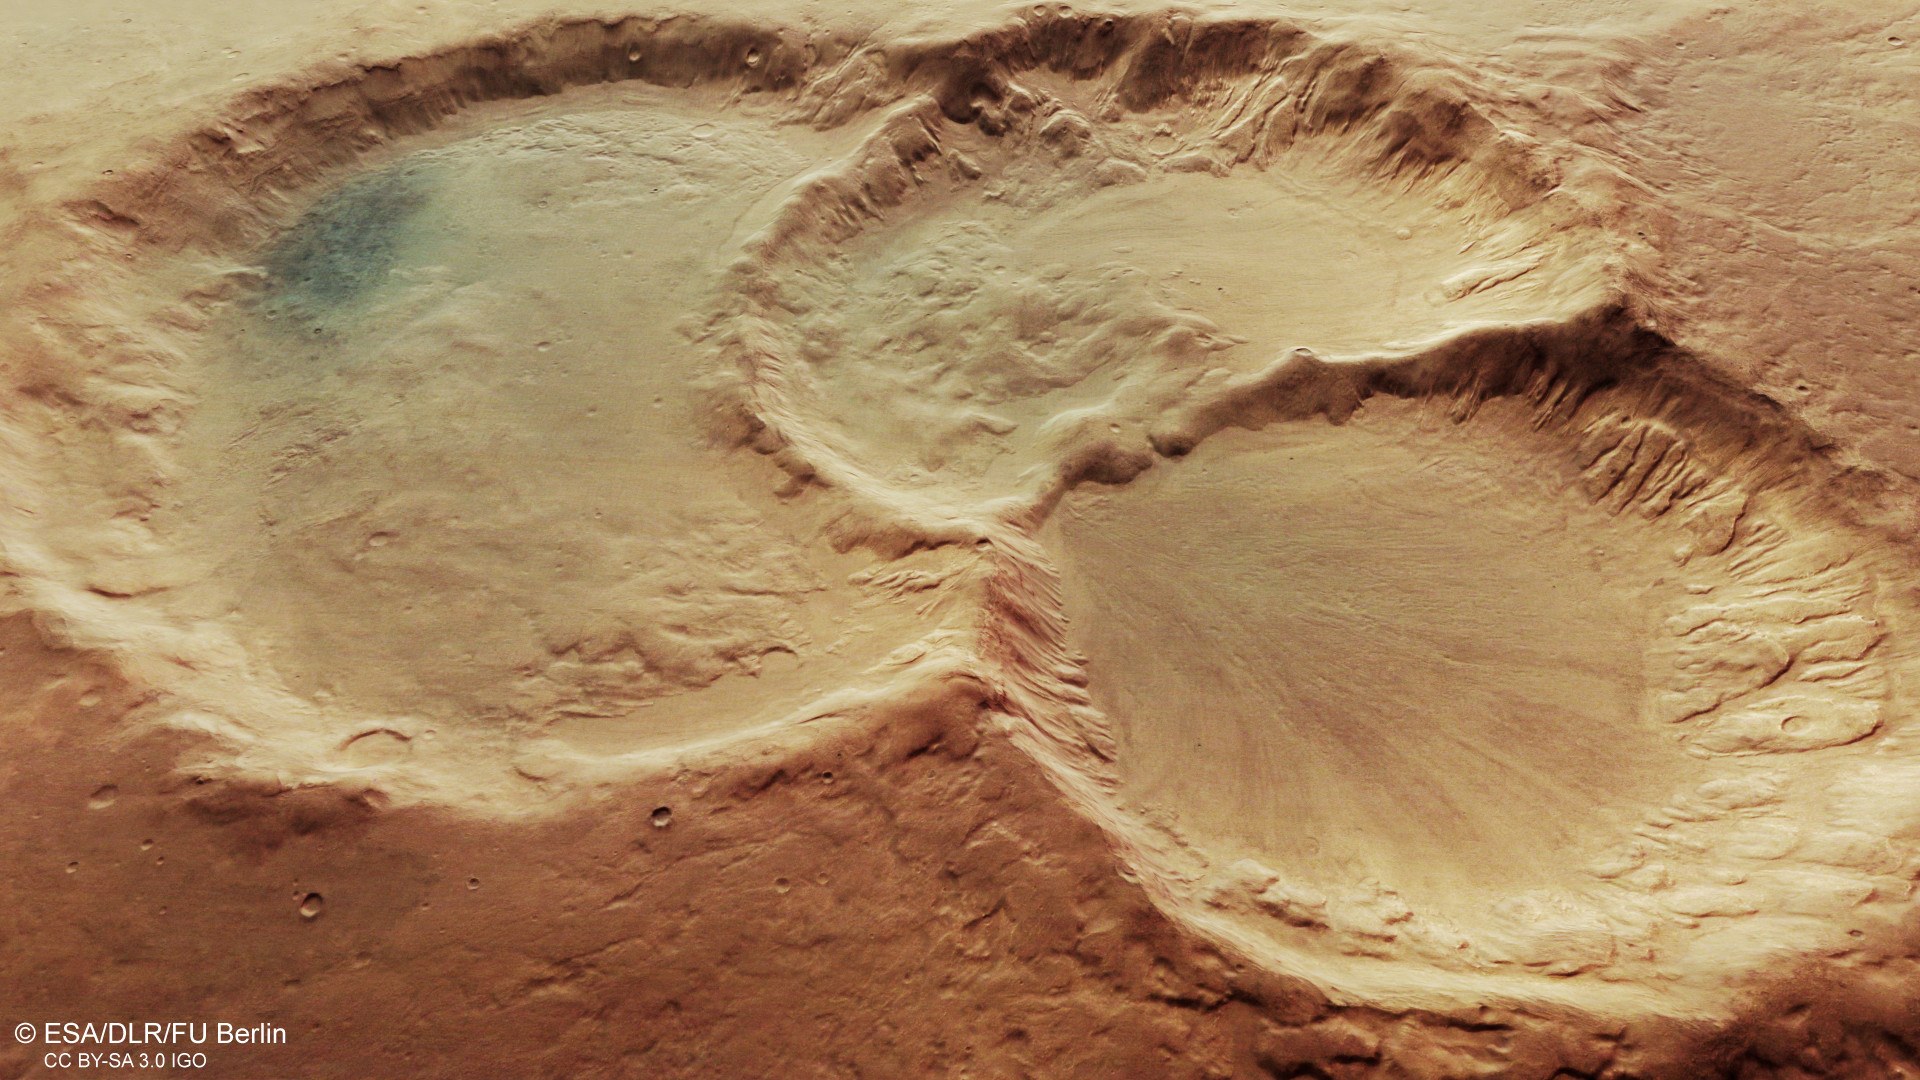 Signs of glacial activity in a crater triplet on the southern highlands of Mars